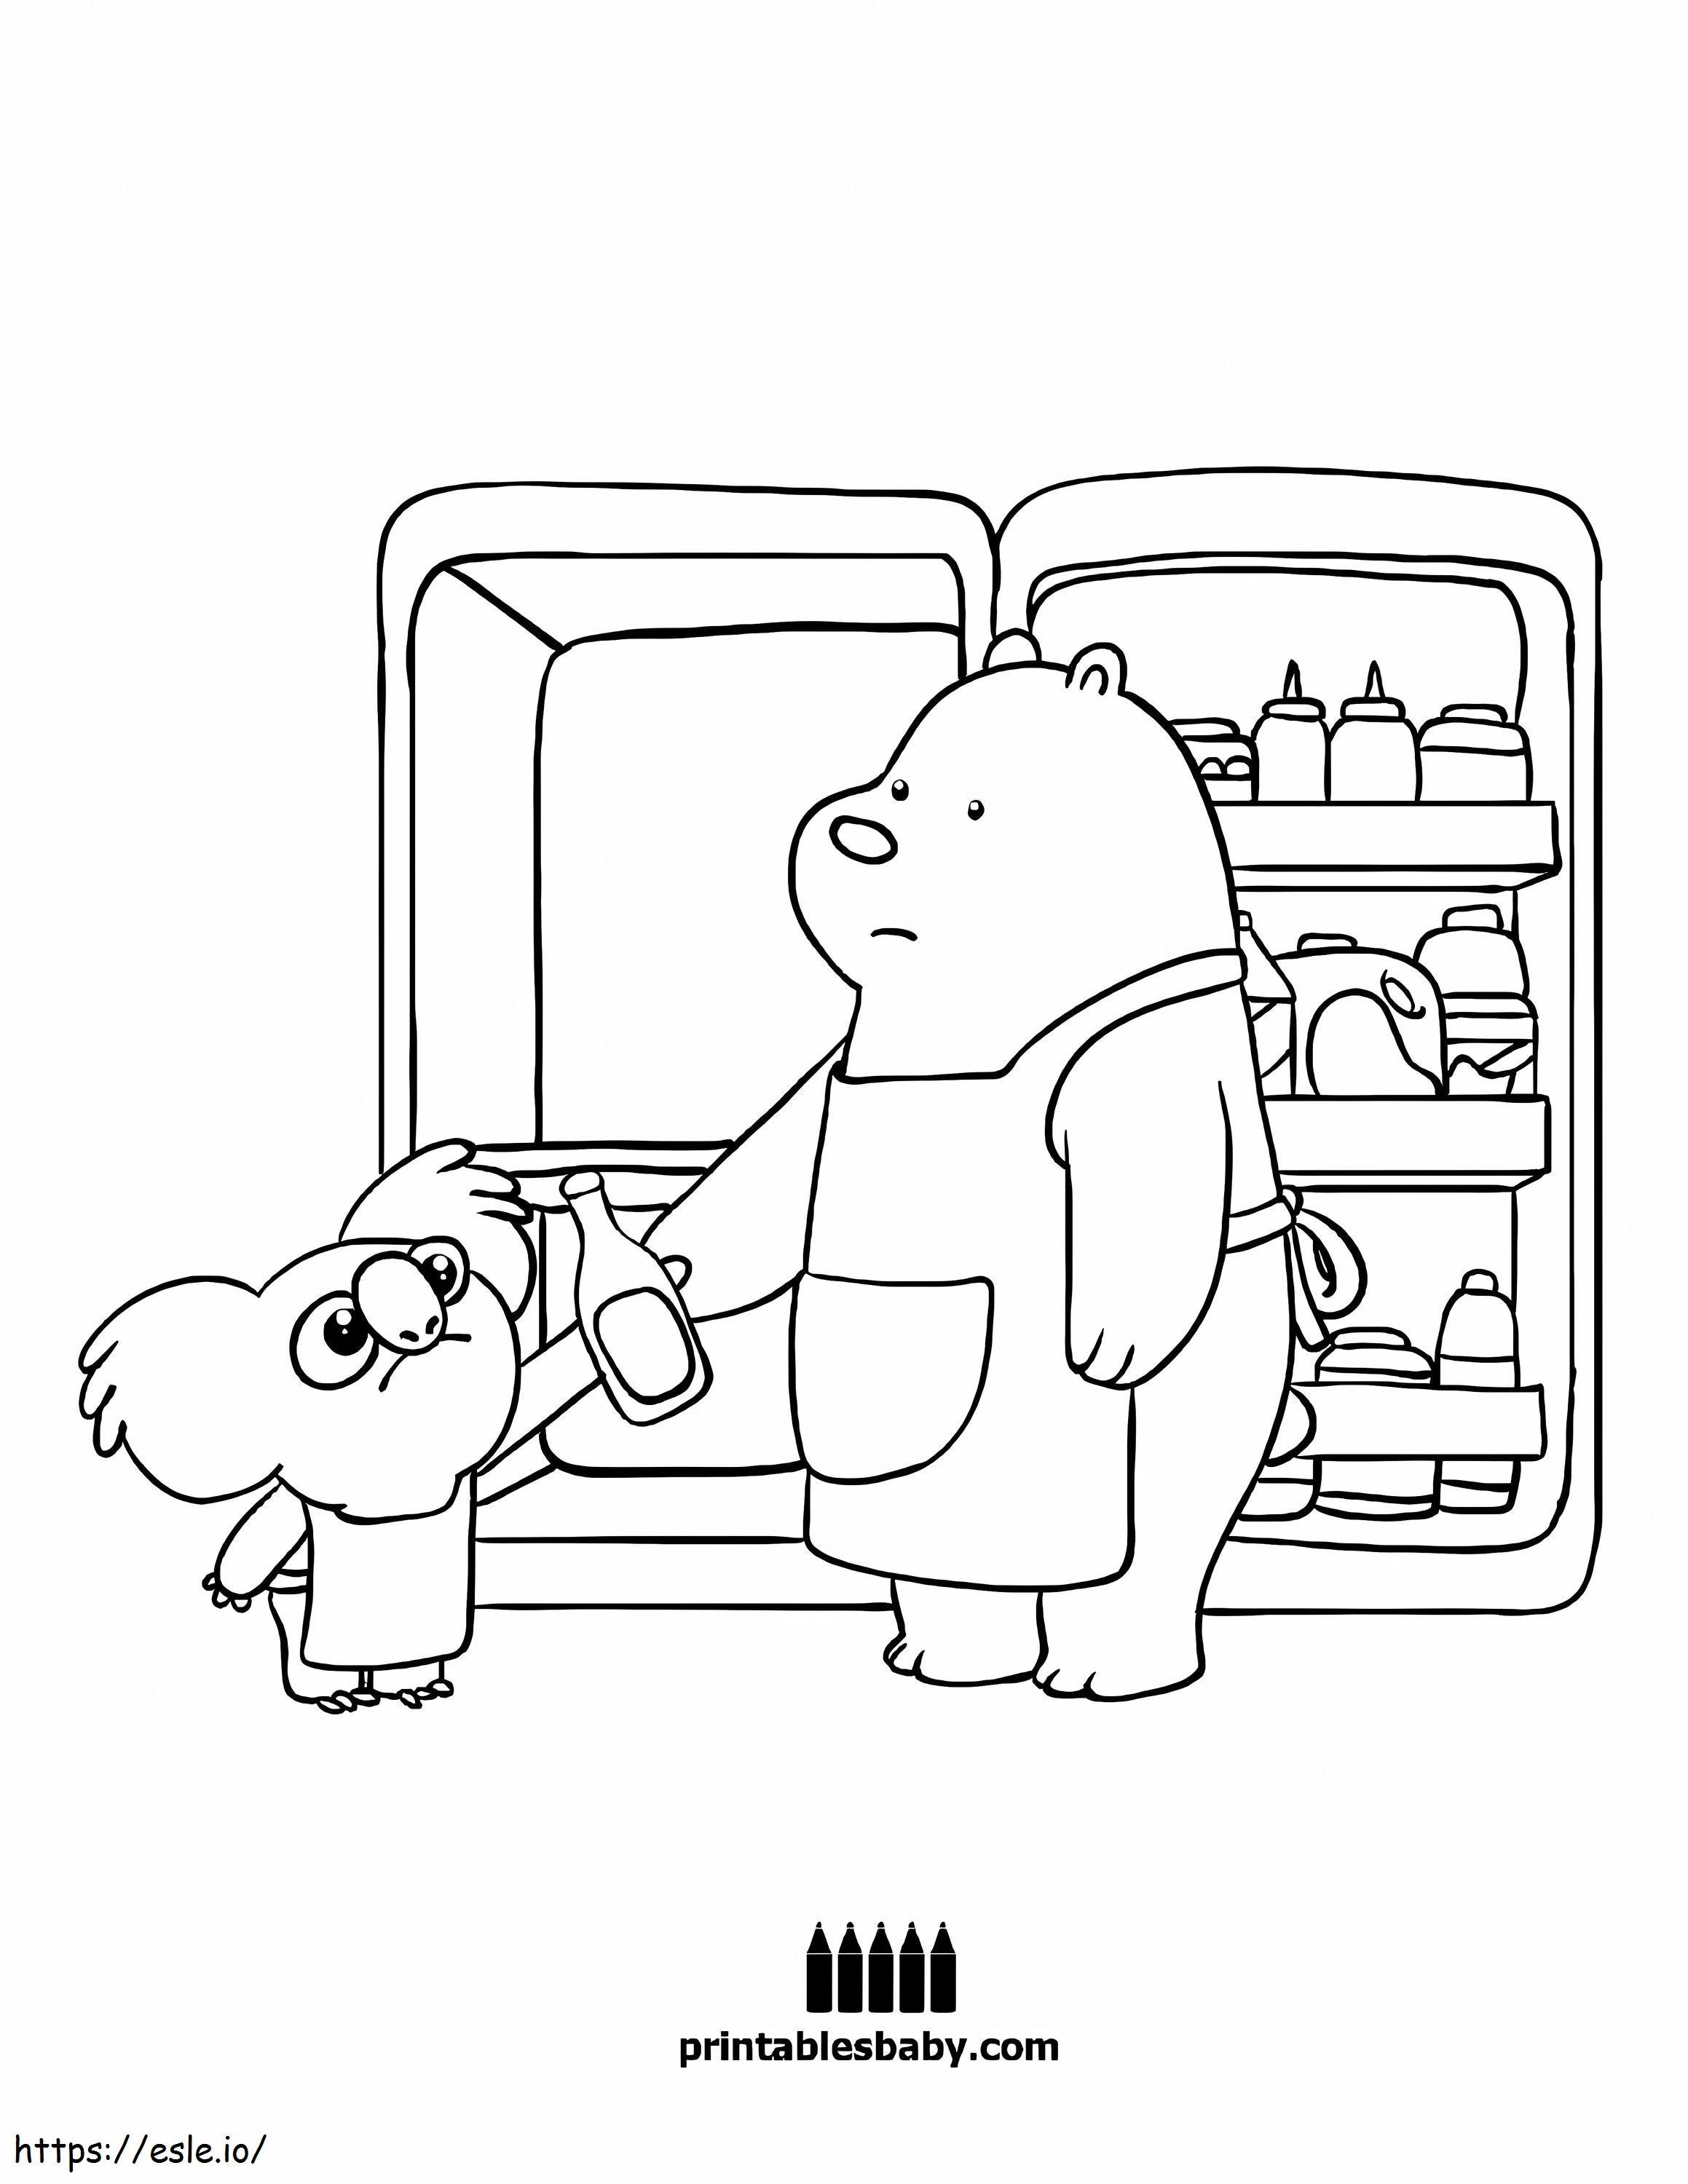 1539416213_8F1391A2634F04Ee95C43Acfa6E94495 coloring page